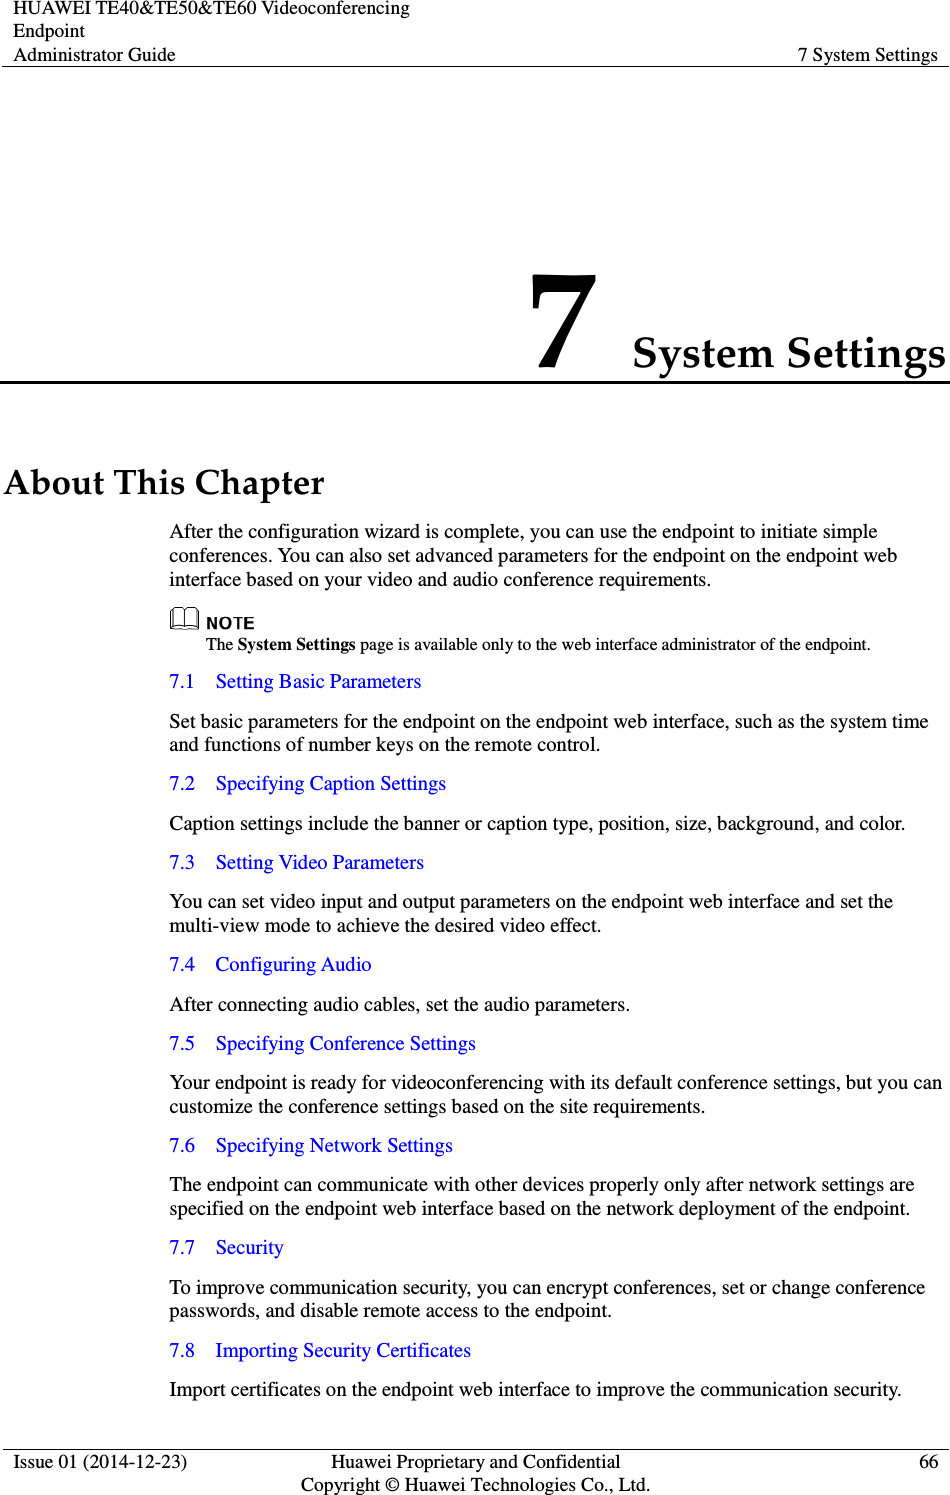 HUAWEI TE40&amp;TE50&amp;TE60 Videoconferencing Endpoint Administrator Guide  7 System Settings  Issue 01 (2014-12-23)  Huawei Proprietary and Confidential                                     Copyright © Huawei Technologies Co., Ltd. 66  7 System Settings About This Chapter After the configuration wizard is complete, you can use the endpoint to initiate simple conferences. You can also set advanced parameters for the endpoint on the endpoint web interface based on your video and audio conference requirements.  The System Settings page is available only to the web interface administrator of the endpoint. 7.1    Setting Basic Parameters Set basic parameters for the endpoint on the endpoint web interface, such as the system time and functions of number keys on the remote control. 7.2    Specifying Caption Settings Caption settings include the banner or caption type, position, size, background, and color. 7.3    Setting Video Parameters You can set video input and output parameters on the endpoint web interface and set the multi-view mode to achieve the desired video effect. 7.4    Configuring Audio After connecting audio cables, set the audio parameters. 7.5    Specifying Conference Settings Your endpoint is ready for videoconferencing with its default conference settings, but you can customize the conference settings based on the site requirements. 7.6    Specifying Network Settings The endpoint can communicate with other devices properly only after network settings are specified on the endpoint web interface based on the network deployment of the endpoint. 7.7    Security To improve communication security, you can encrypt conferences, set or change conference passwords, and disable remote access to the endpoint. 7.8    Importing Security Certificates Import certificates on the endpoint web interface to improve the communication security. 